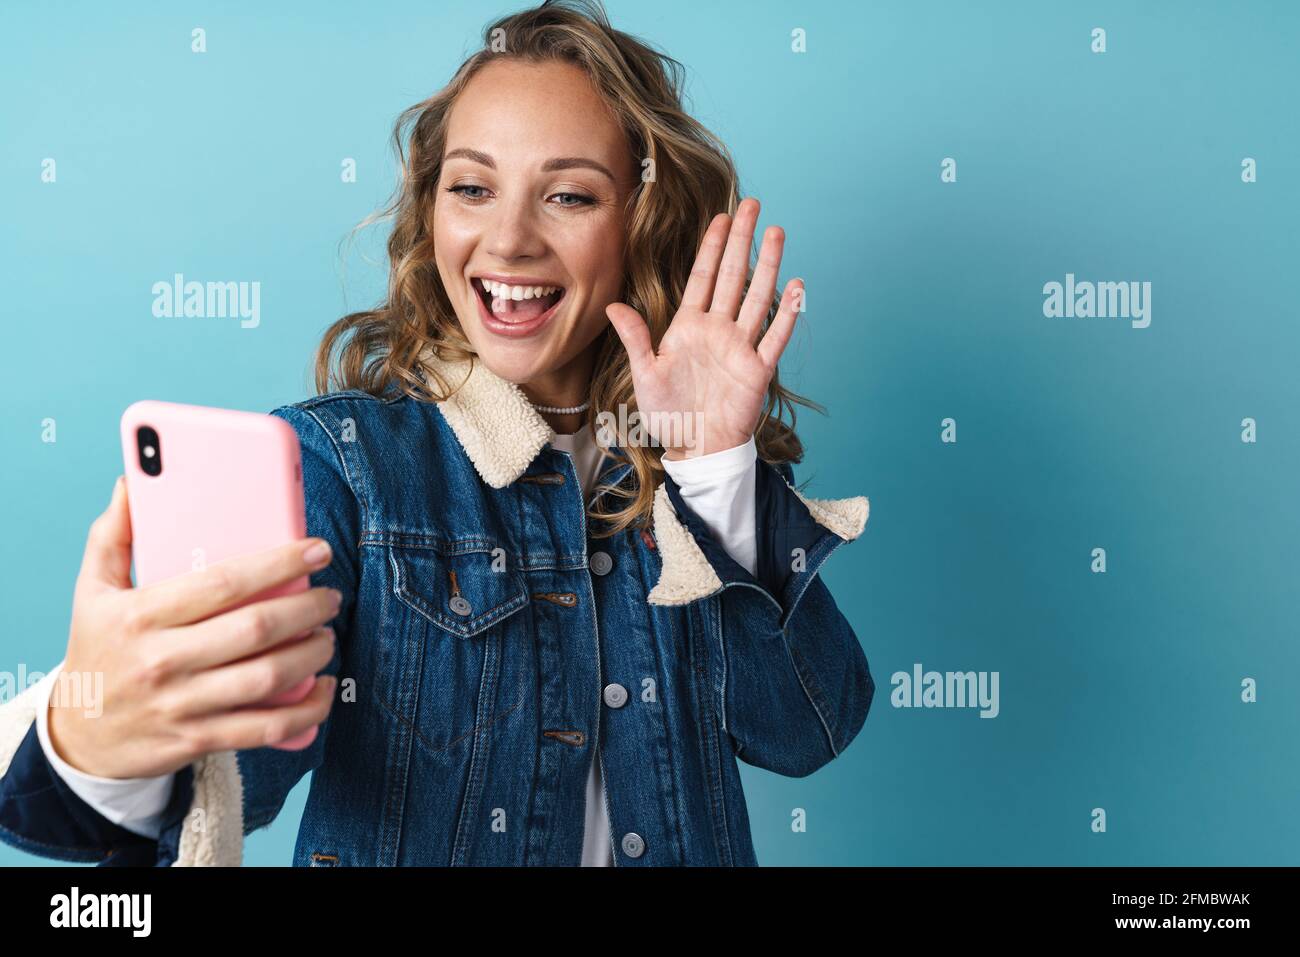 Blonde smiling woman gesturing while using mobile phone isolated over blue wall Stock Photo